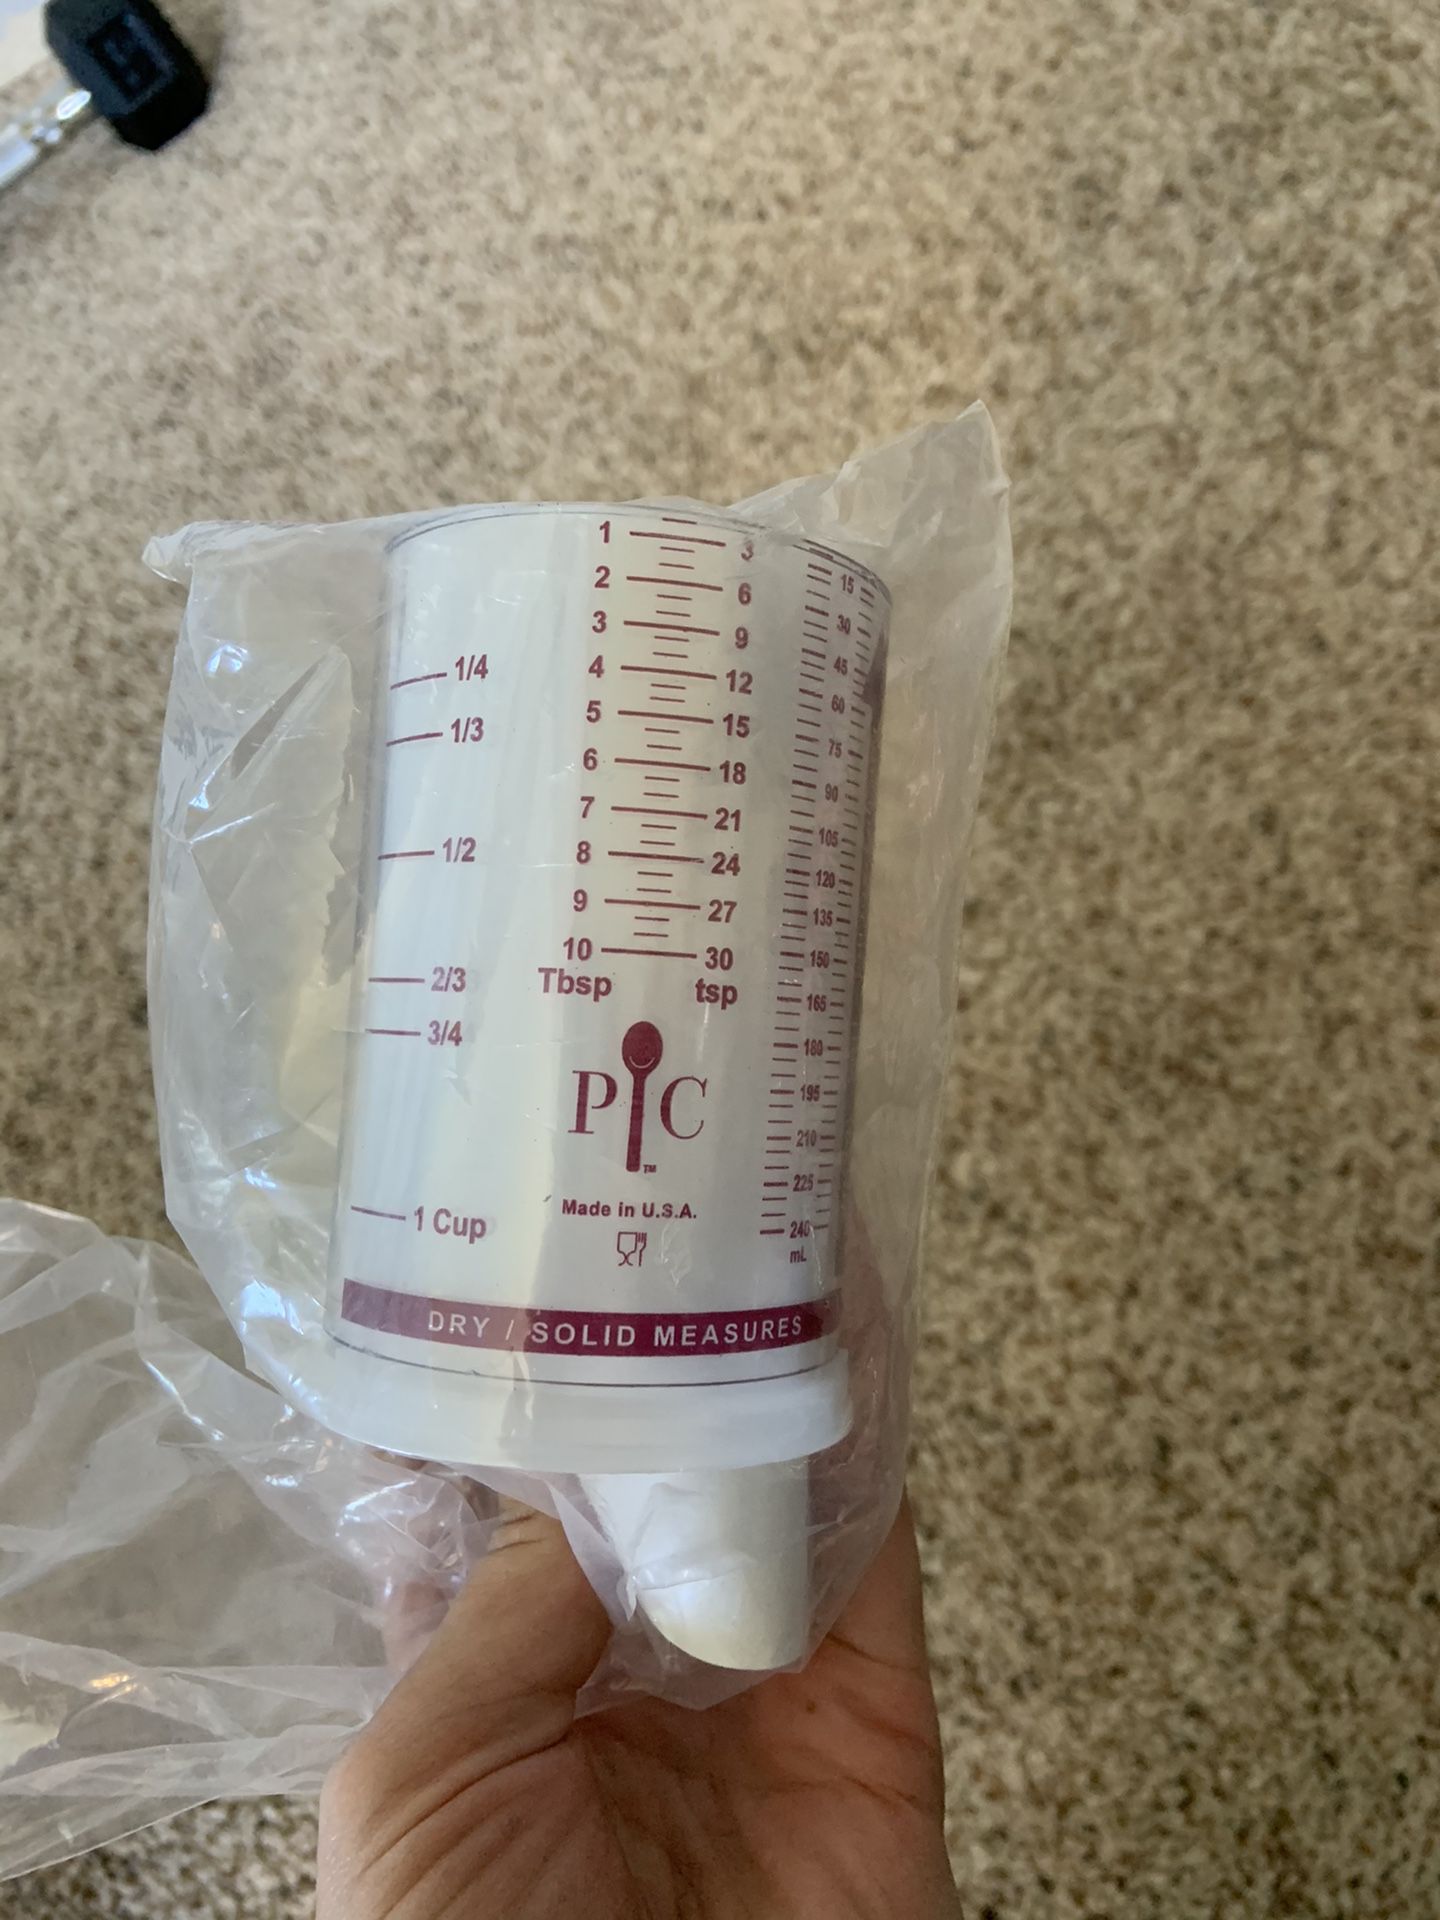 Pampered chef small measuring cup